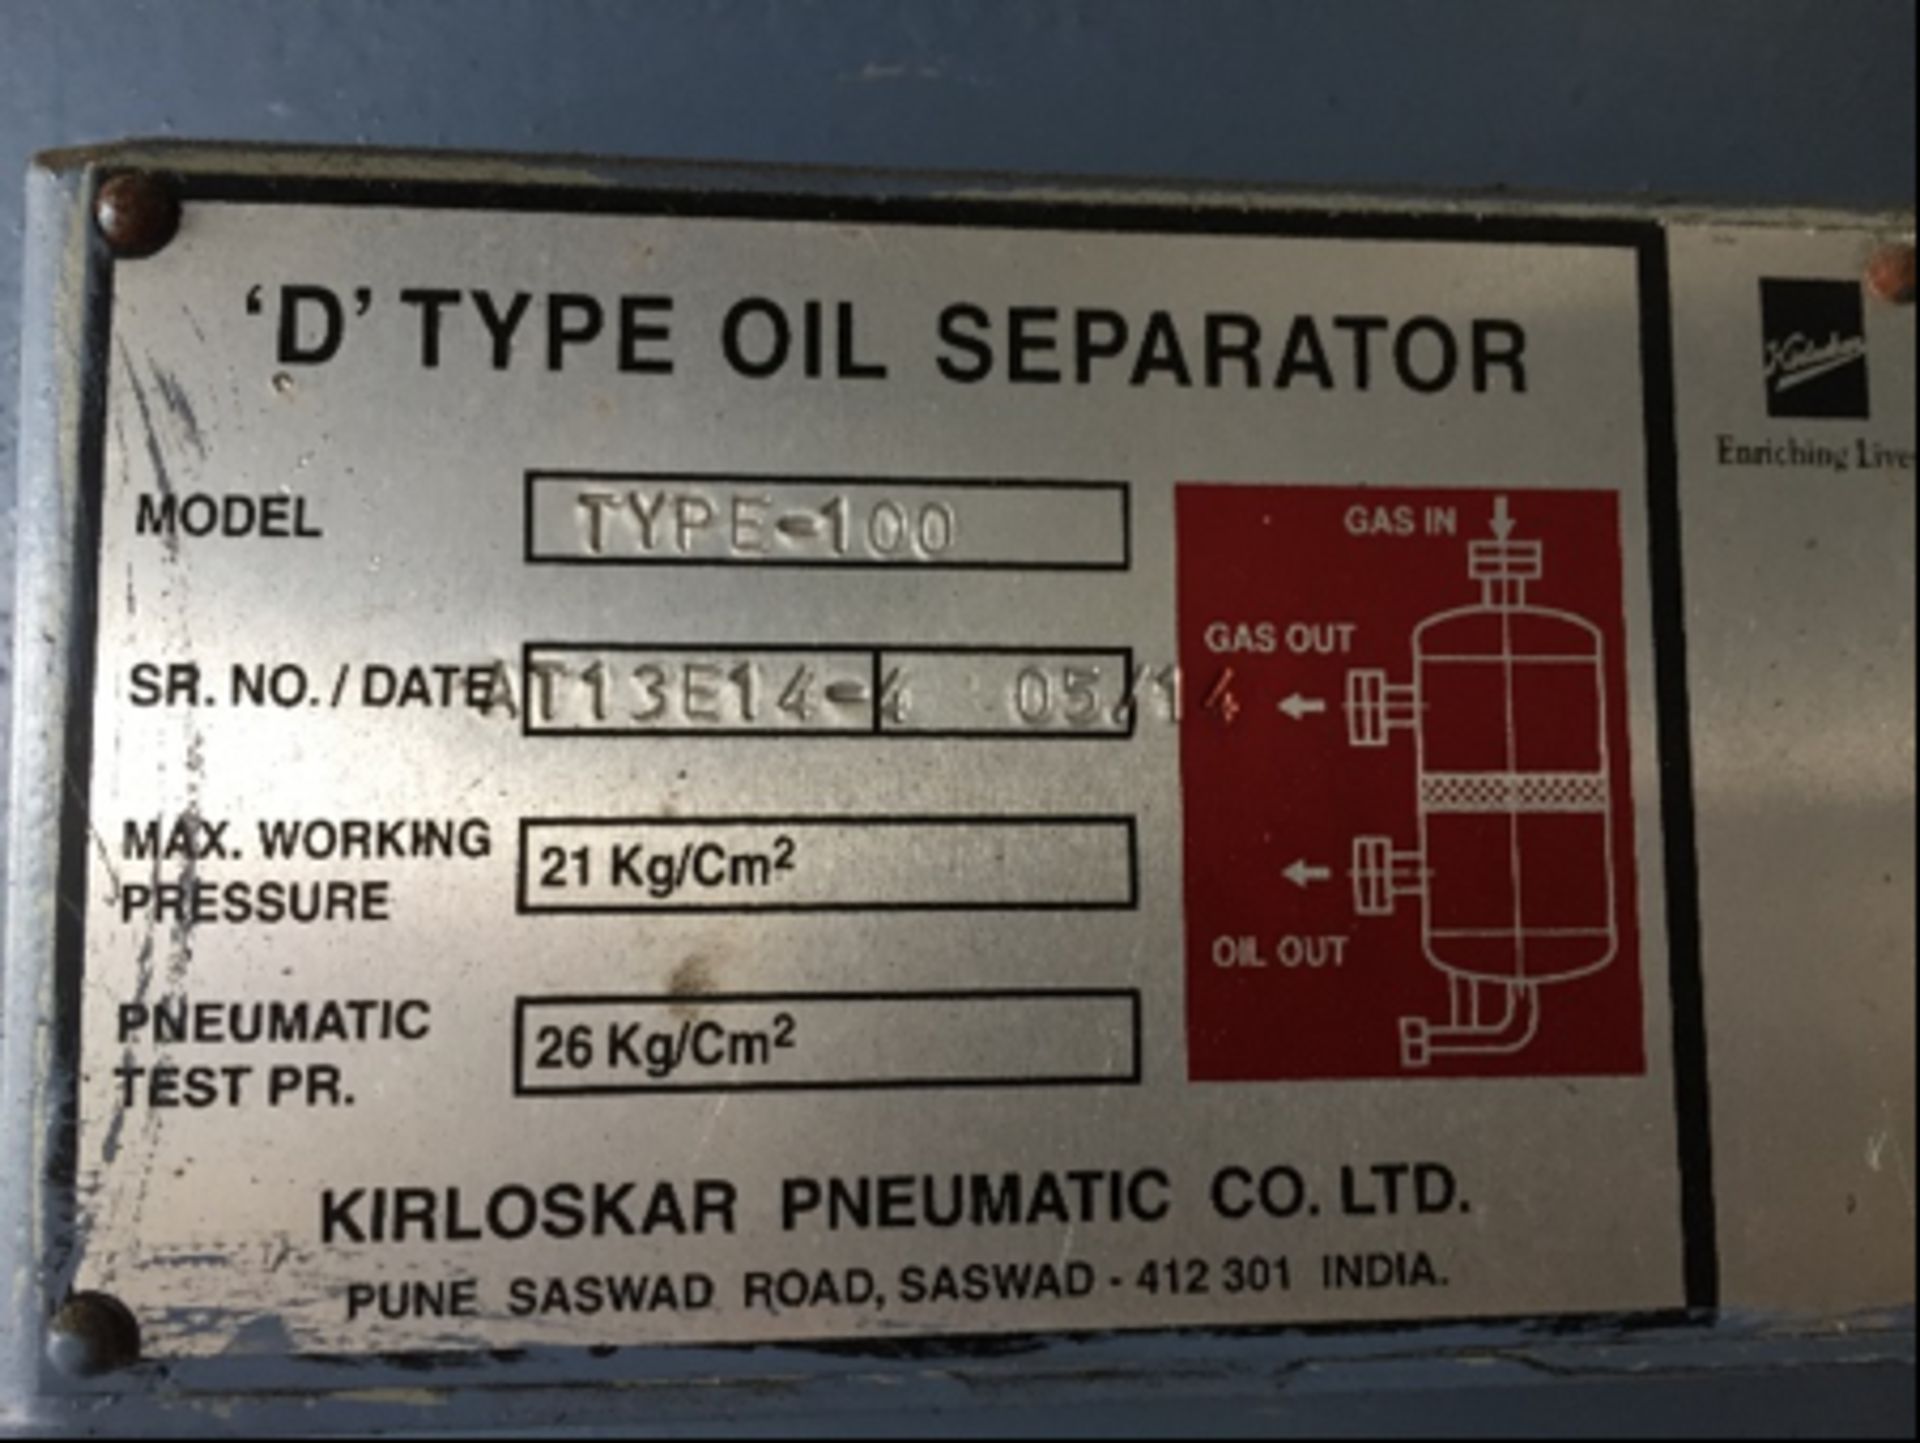 D-Type oil separator - Image 2 of 2